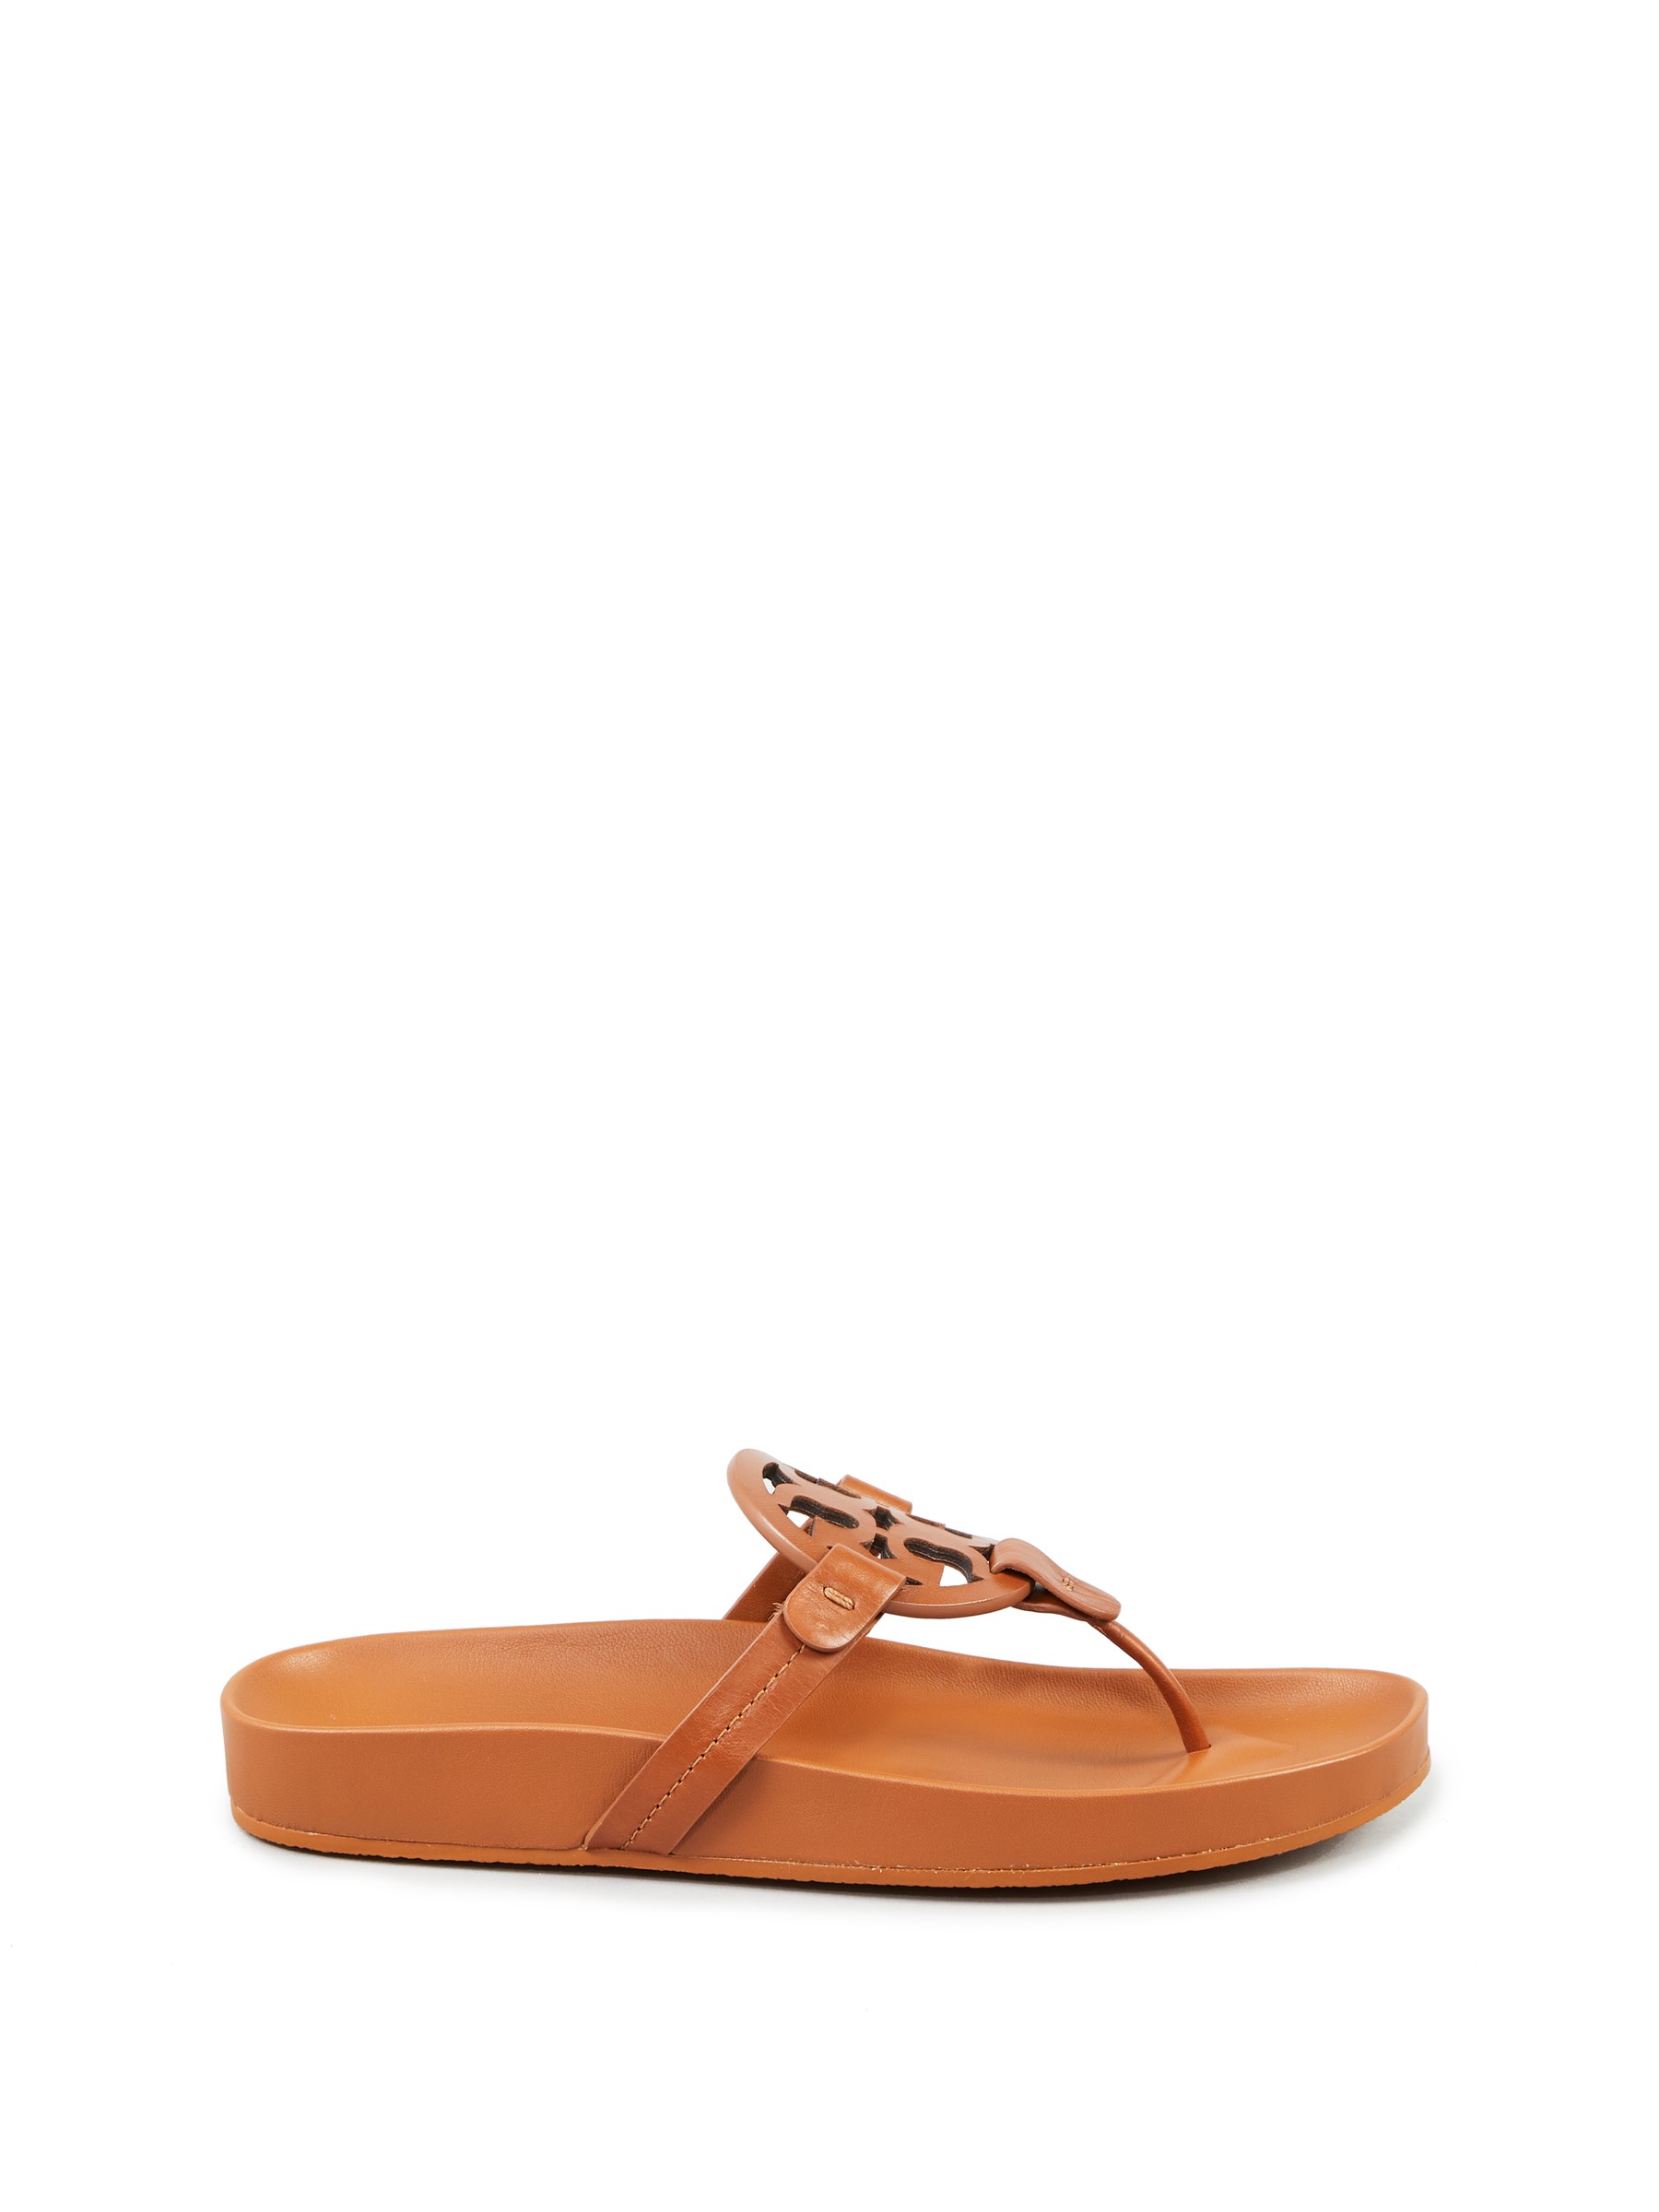 Tory Burch Leather Sandals 'Miller Cloud' Brown | Heeled Sandals